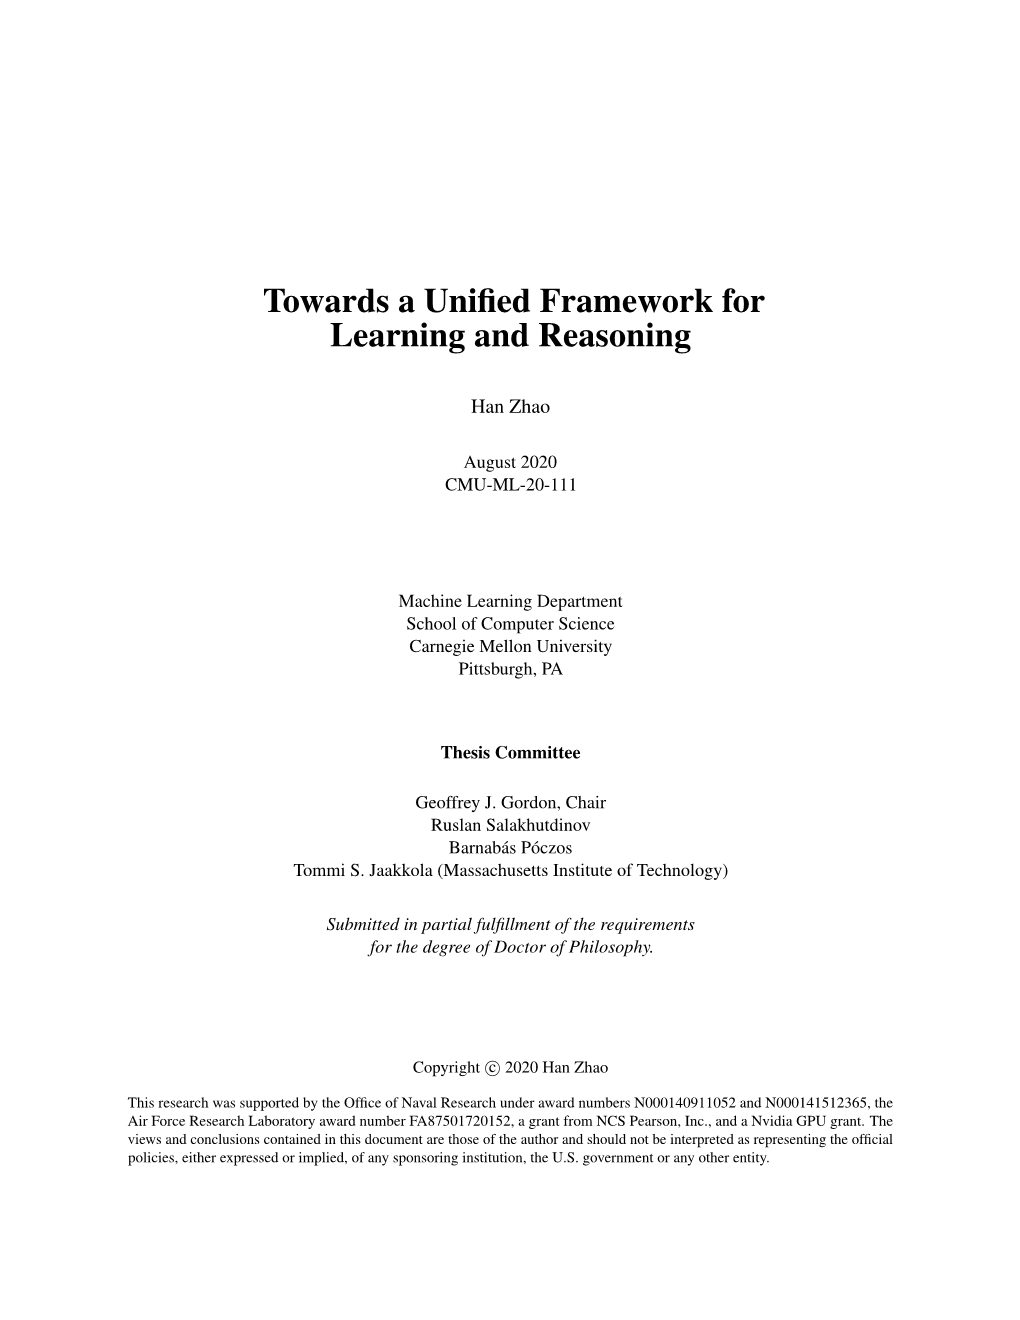 Towards a Unified Framework for Learning and Reasoning